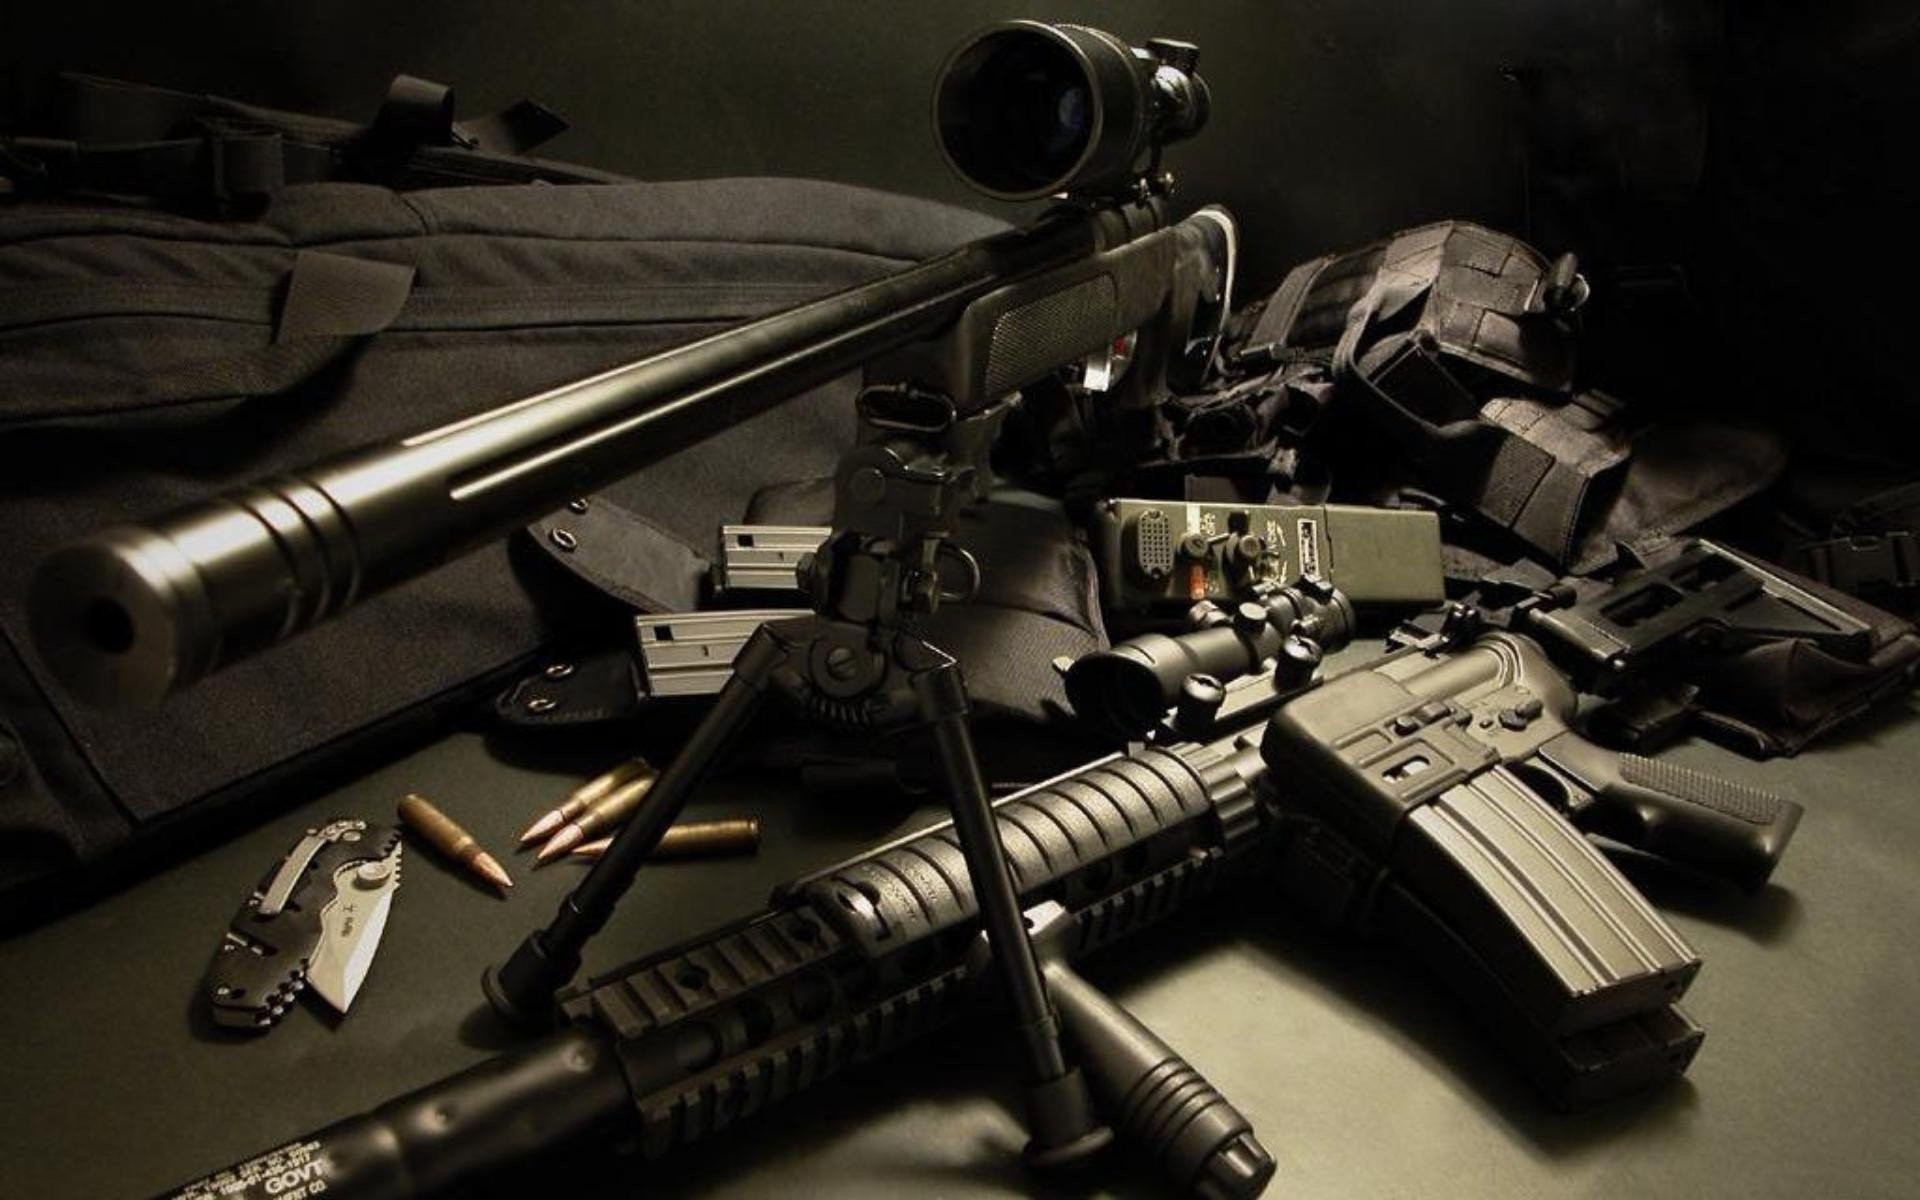 HD Wallpaper Background ID218307. Weapons Sniper Rifle